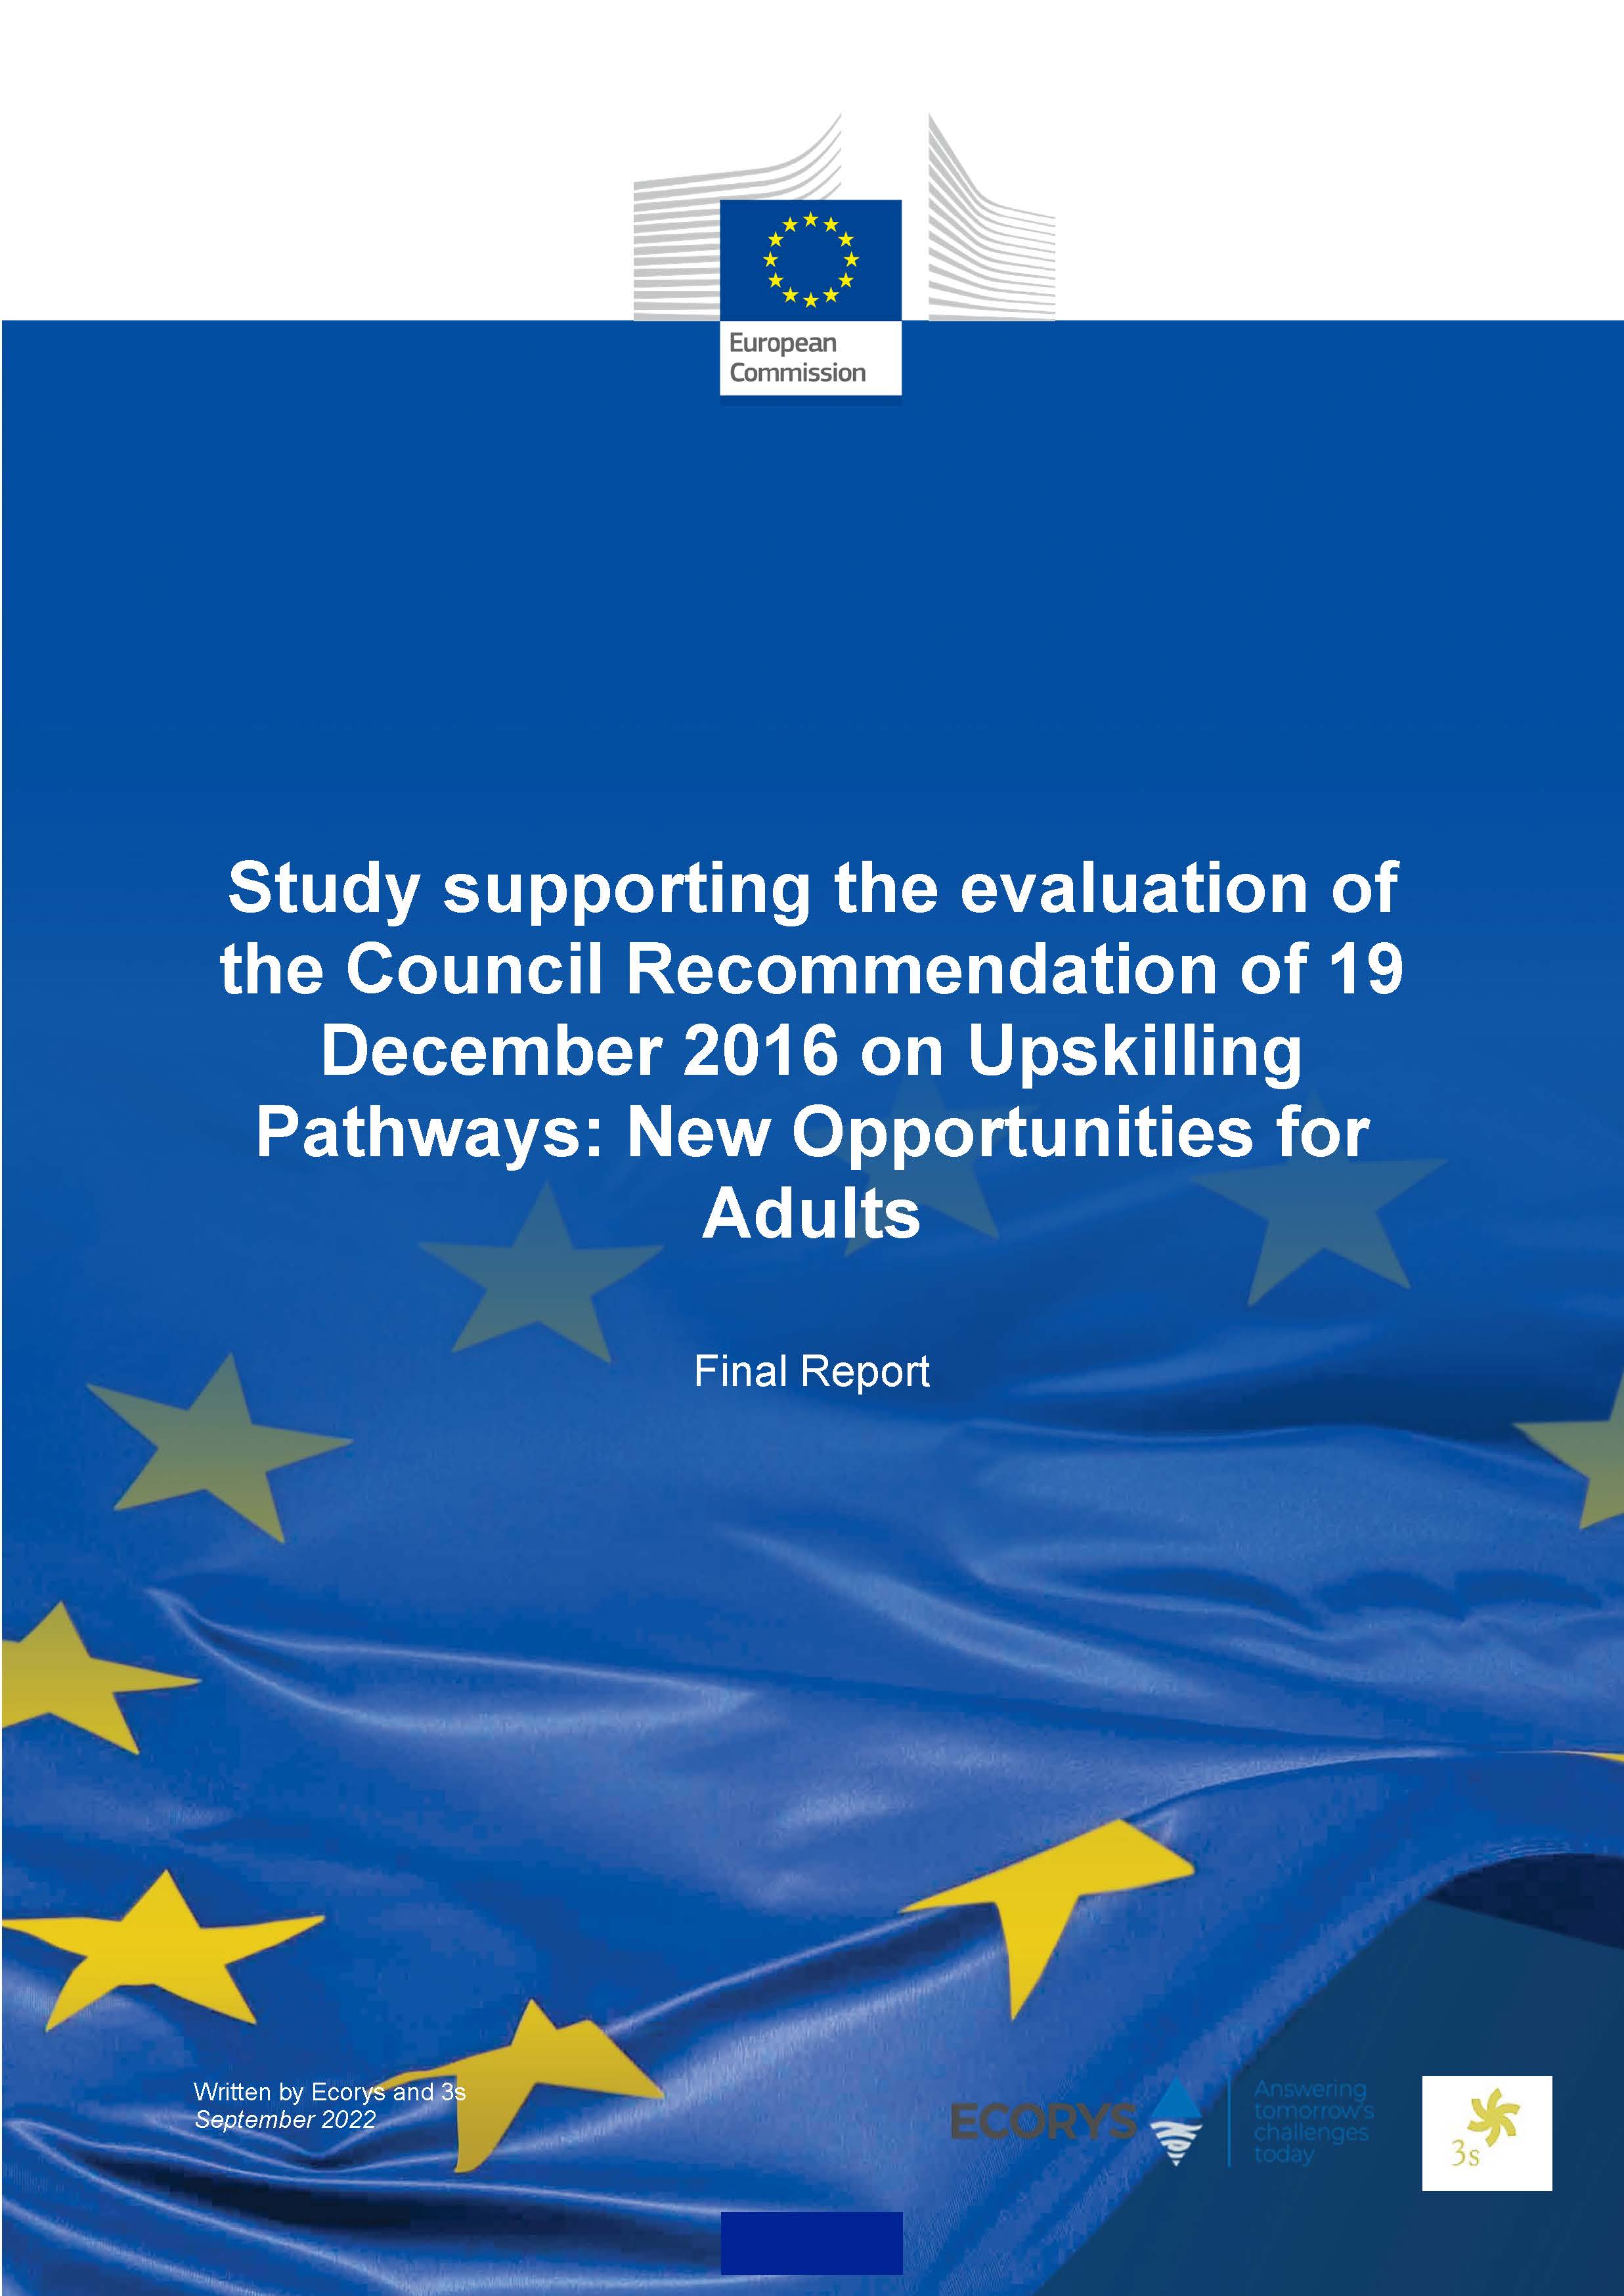 Study supporting the evaluation of the Council Recommendation of 19 December 2016 on Upskilling Pathways: New Opportunities for Adults